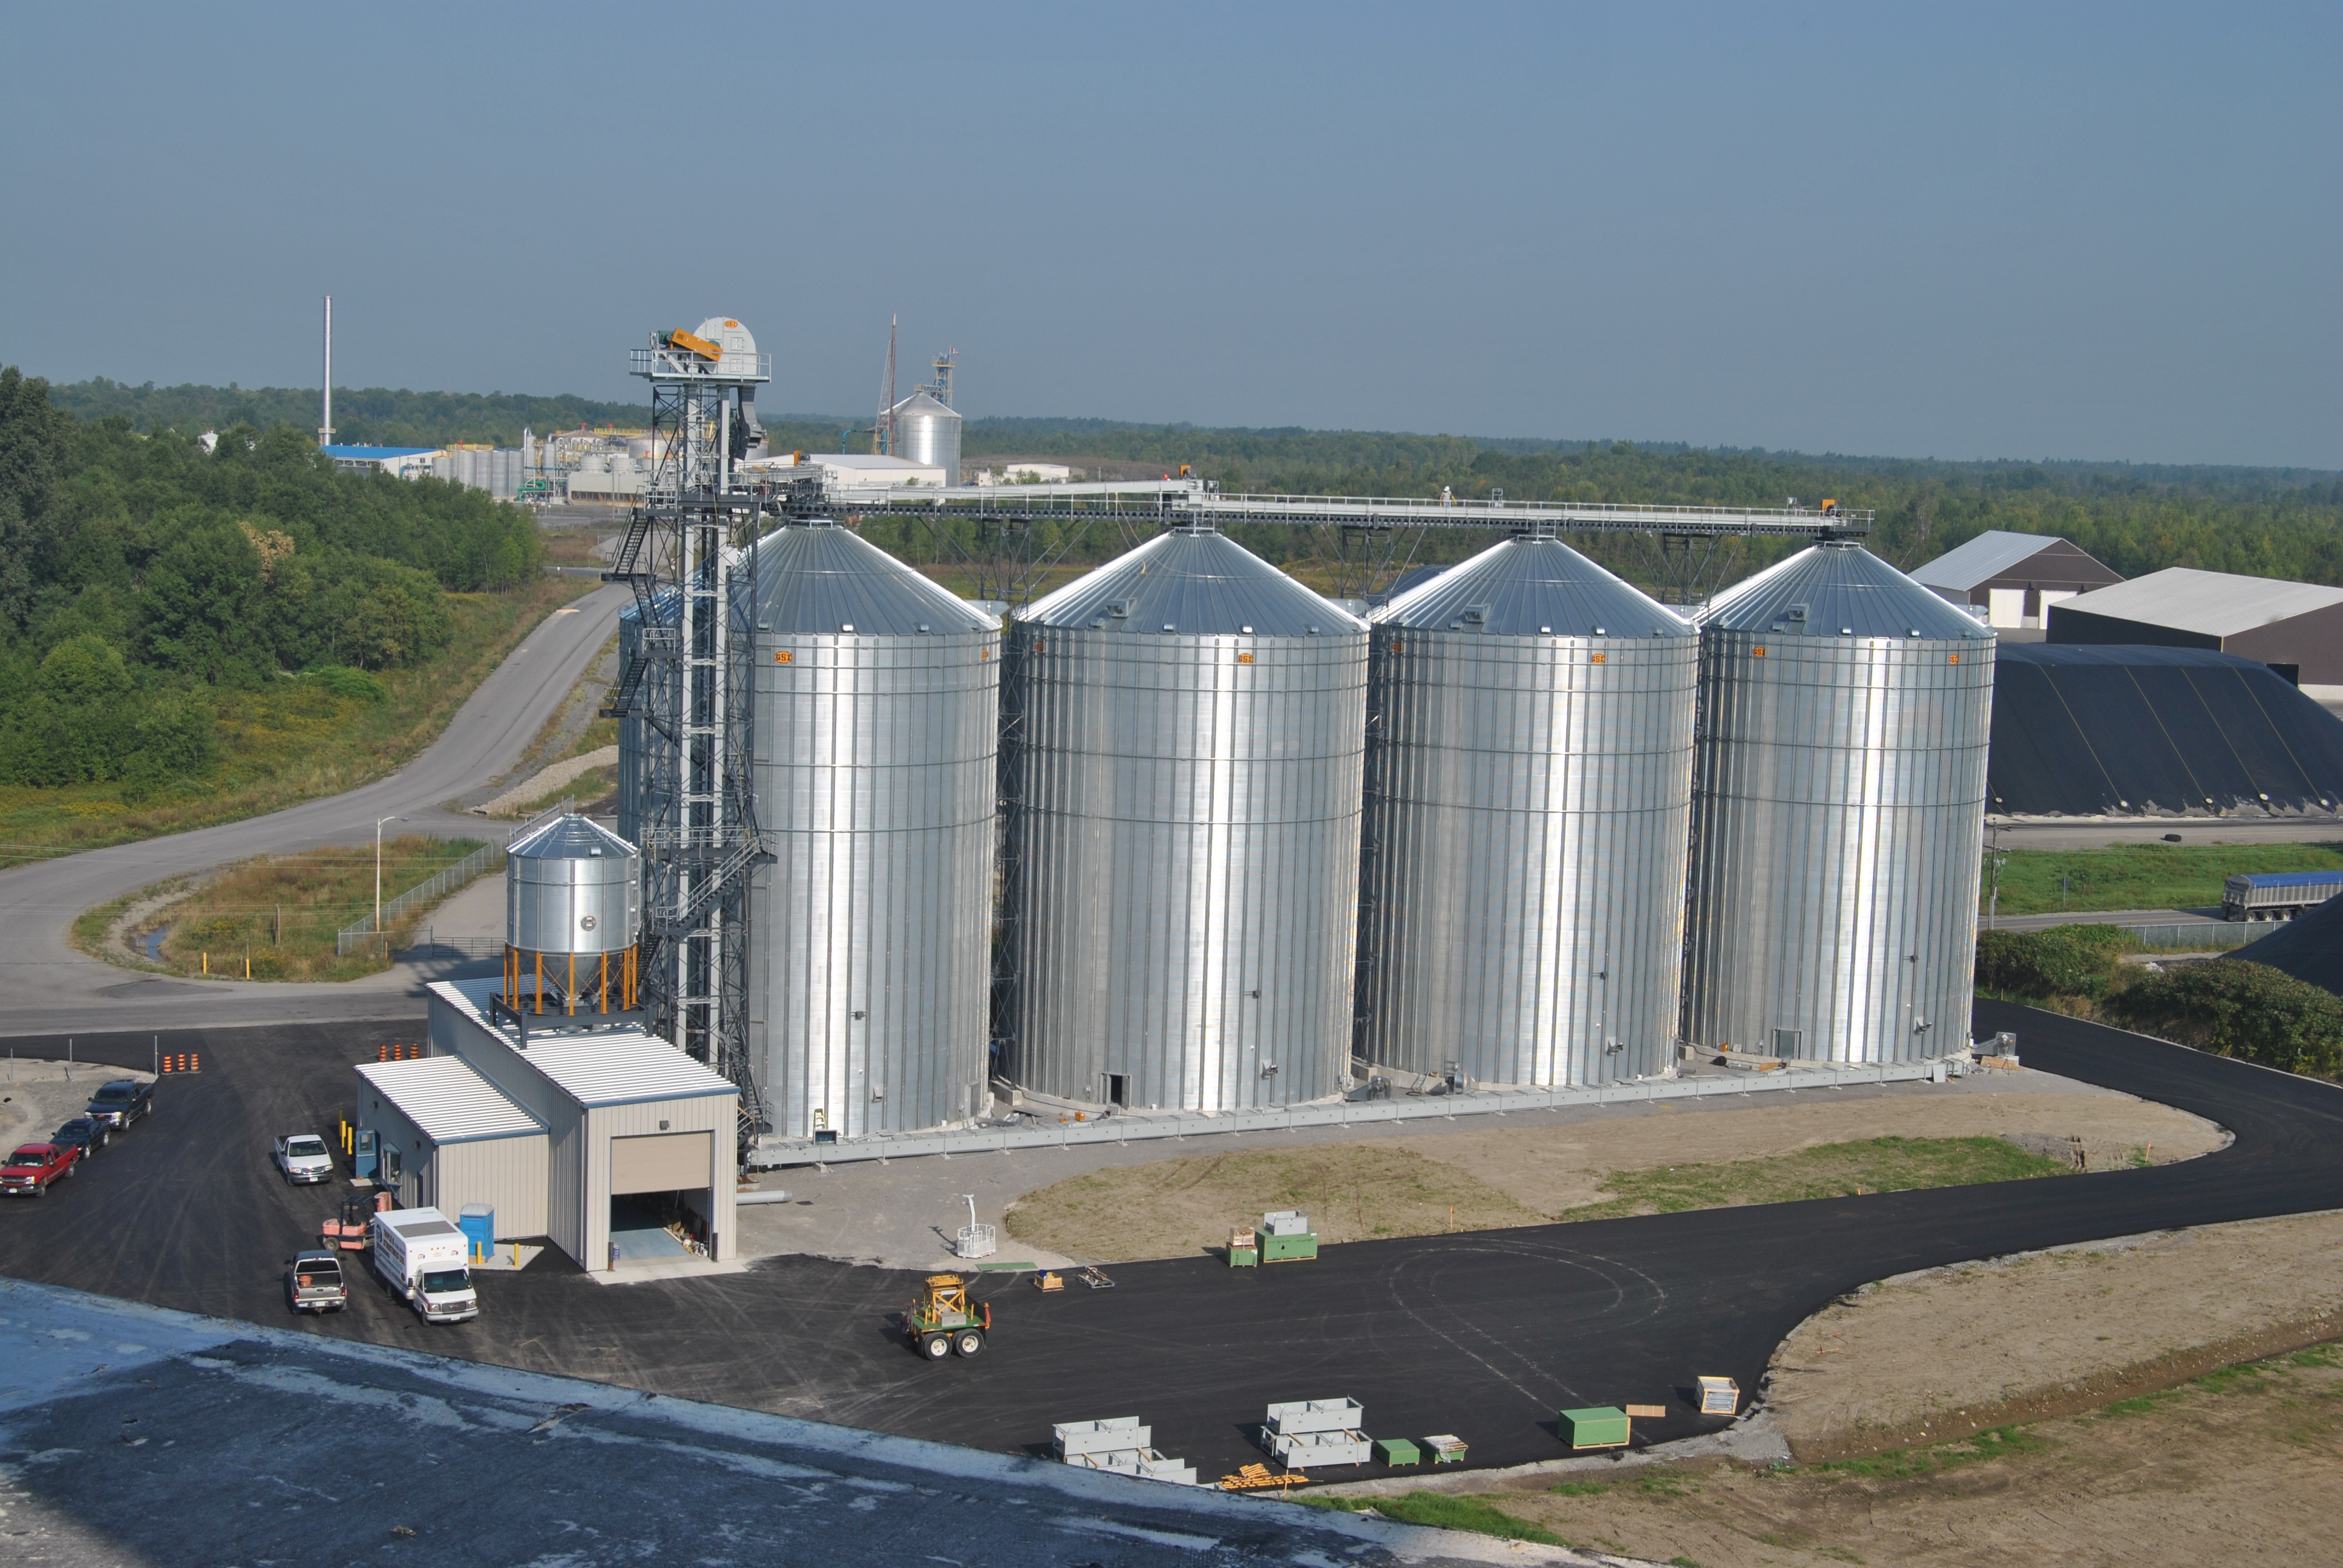 Four silos located in an industrial area